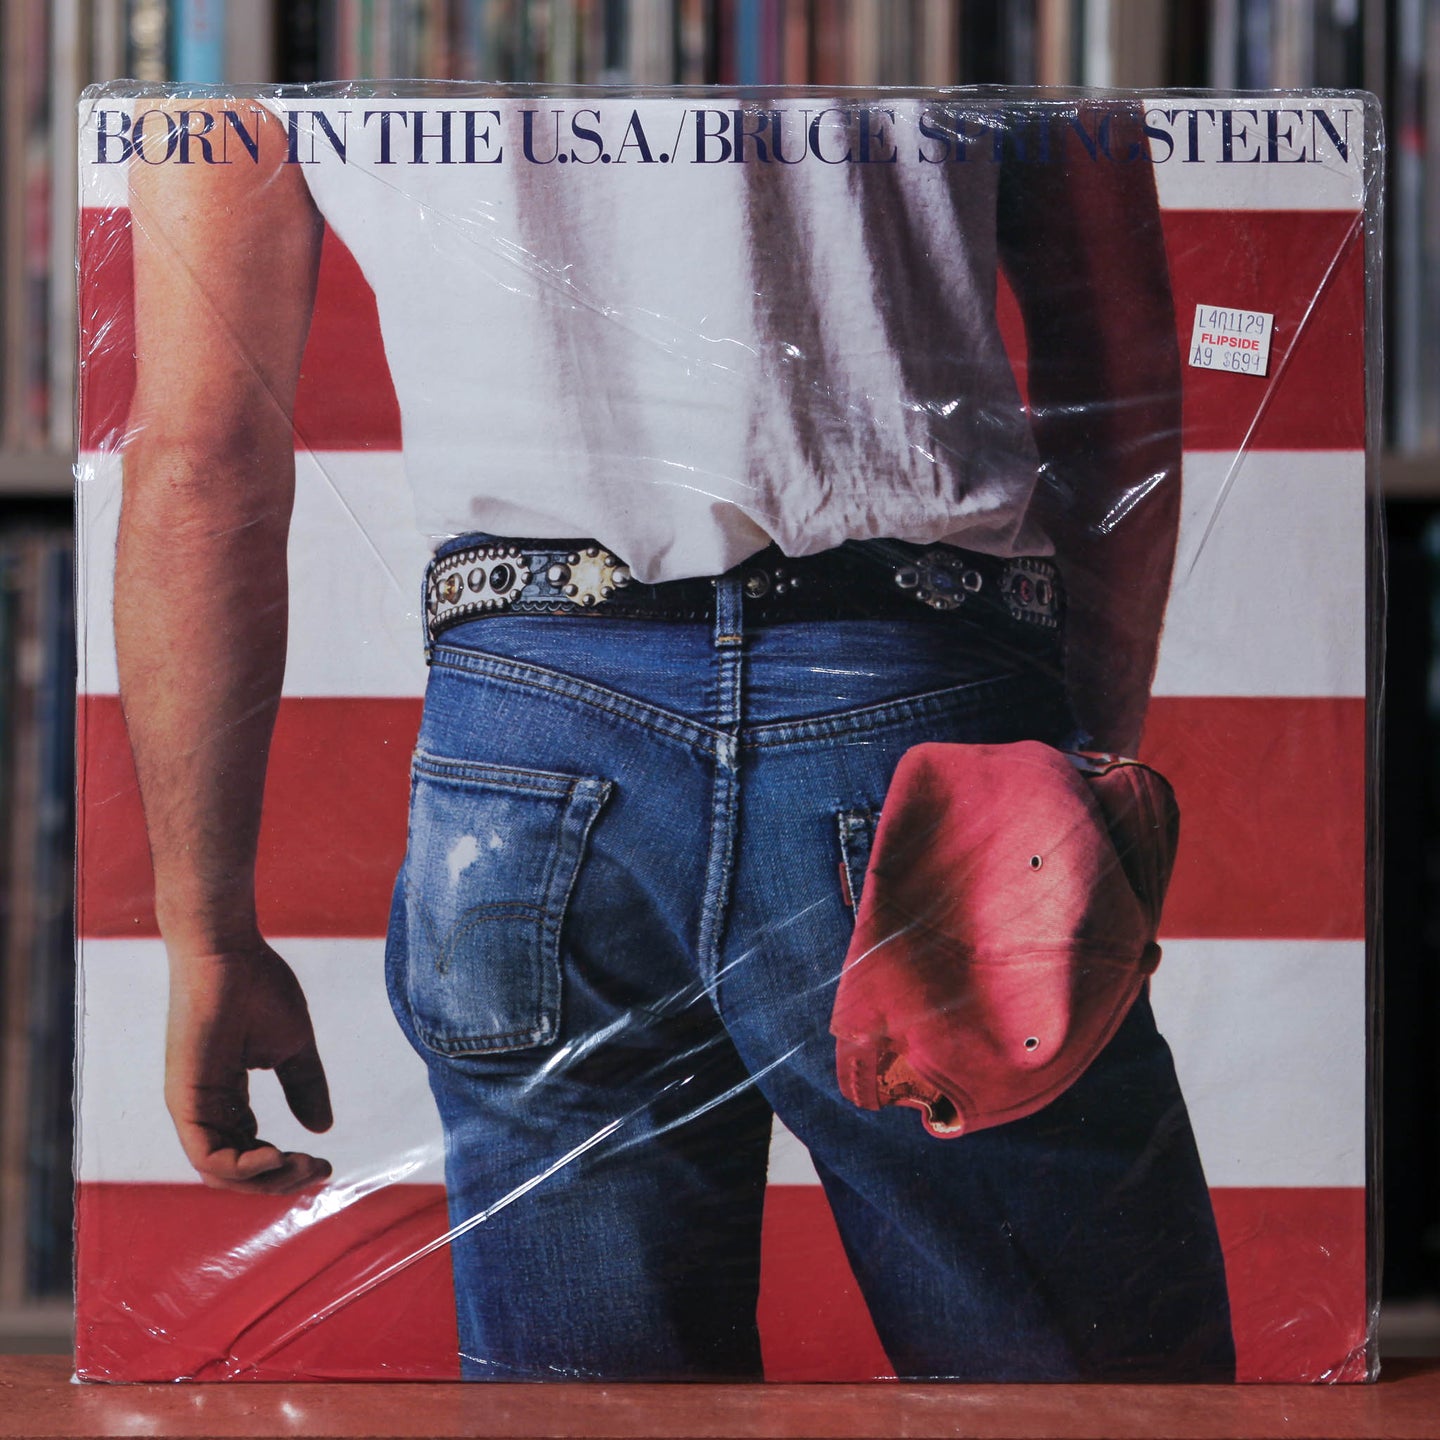 Bruce Springsteen - Born In The U.S.A. - Canada Import - 1984 Columbia, SEALED